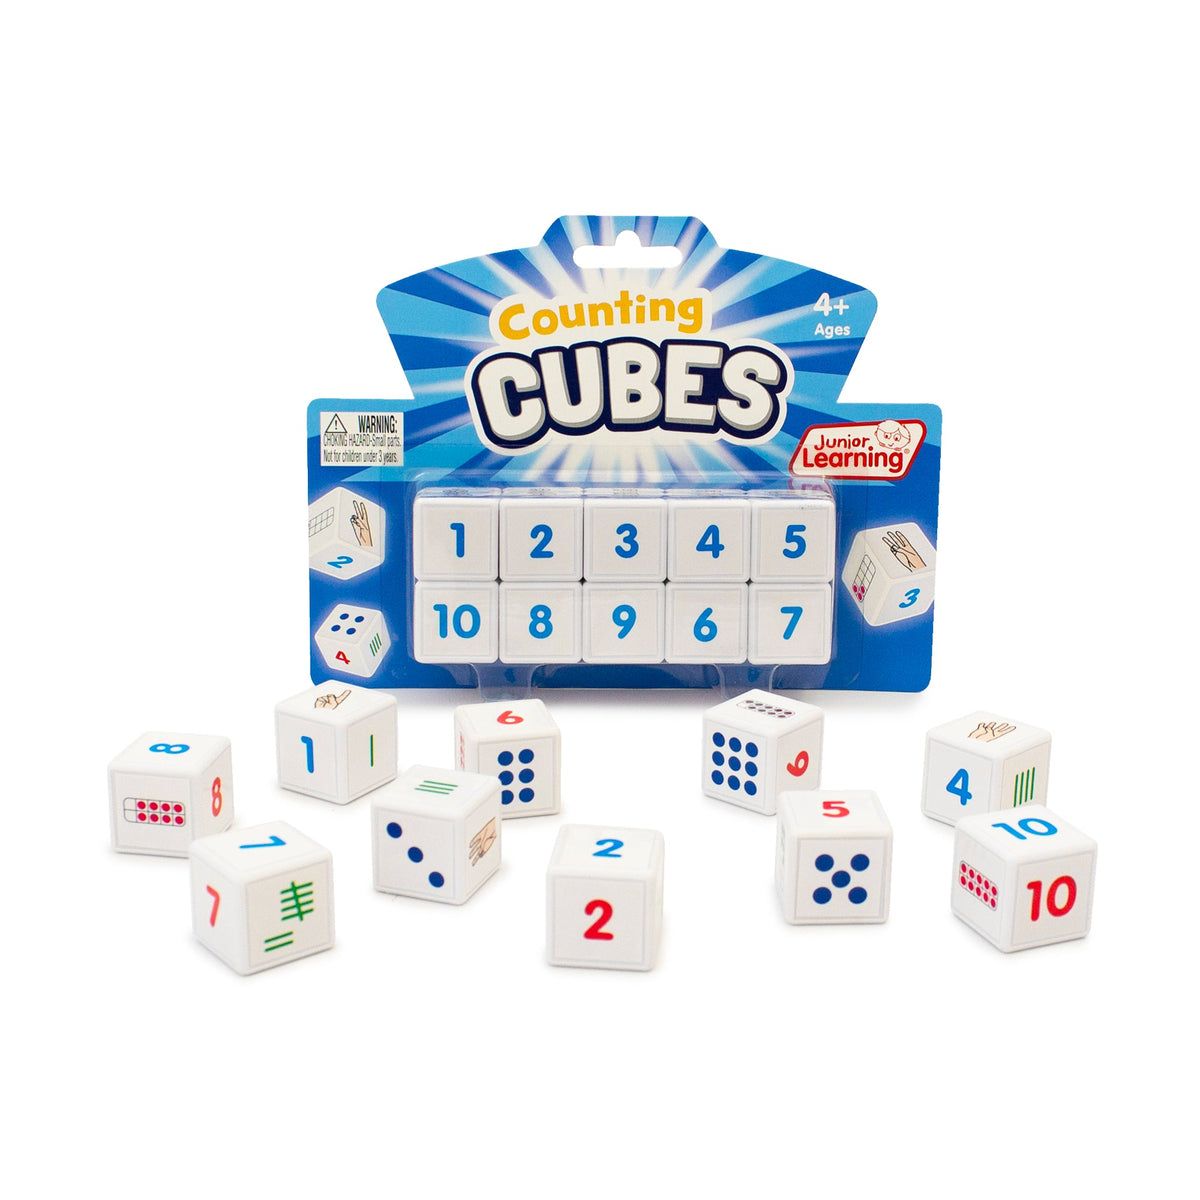 Junior Learning JL645 Counting Cubes packaging and pieces faced front